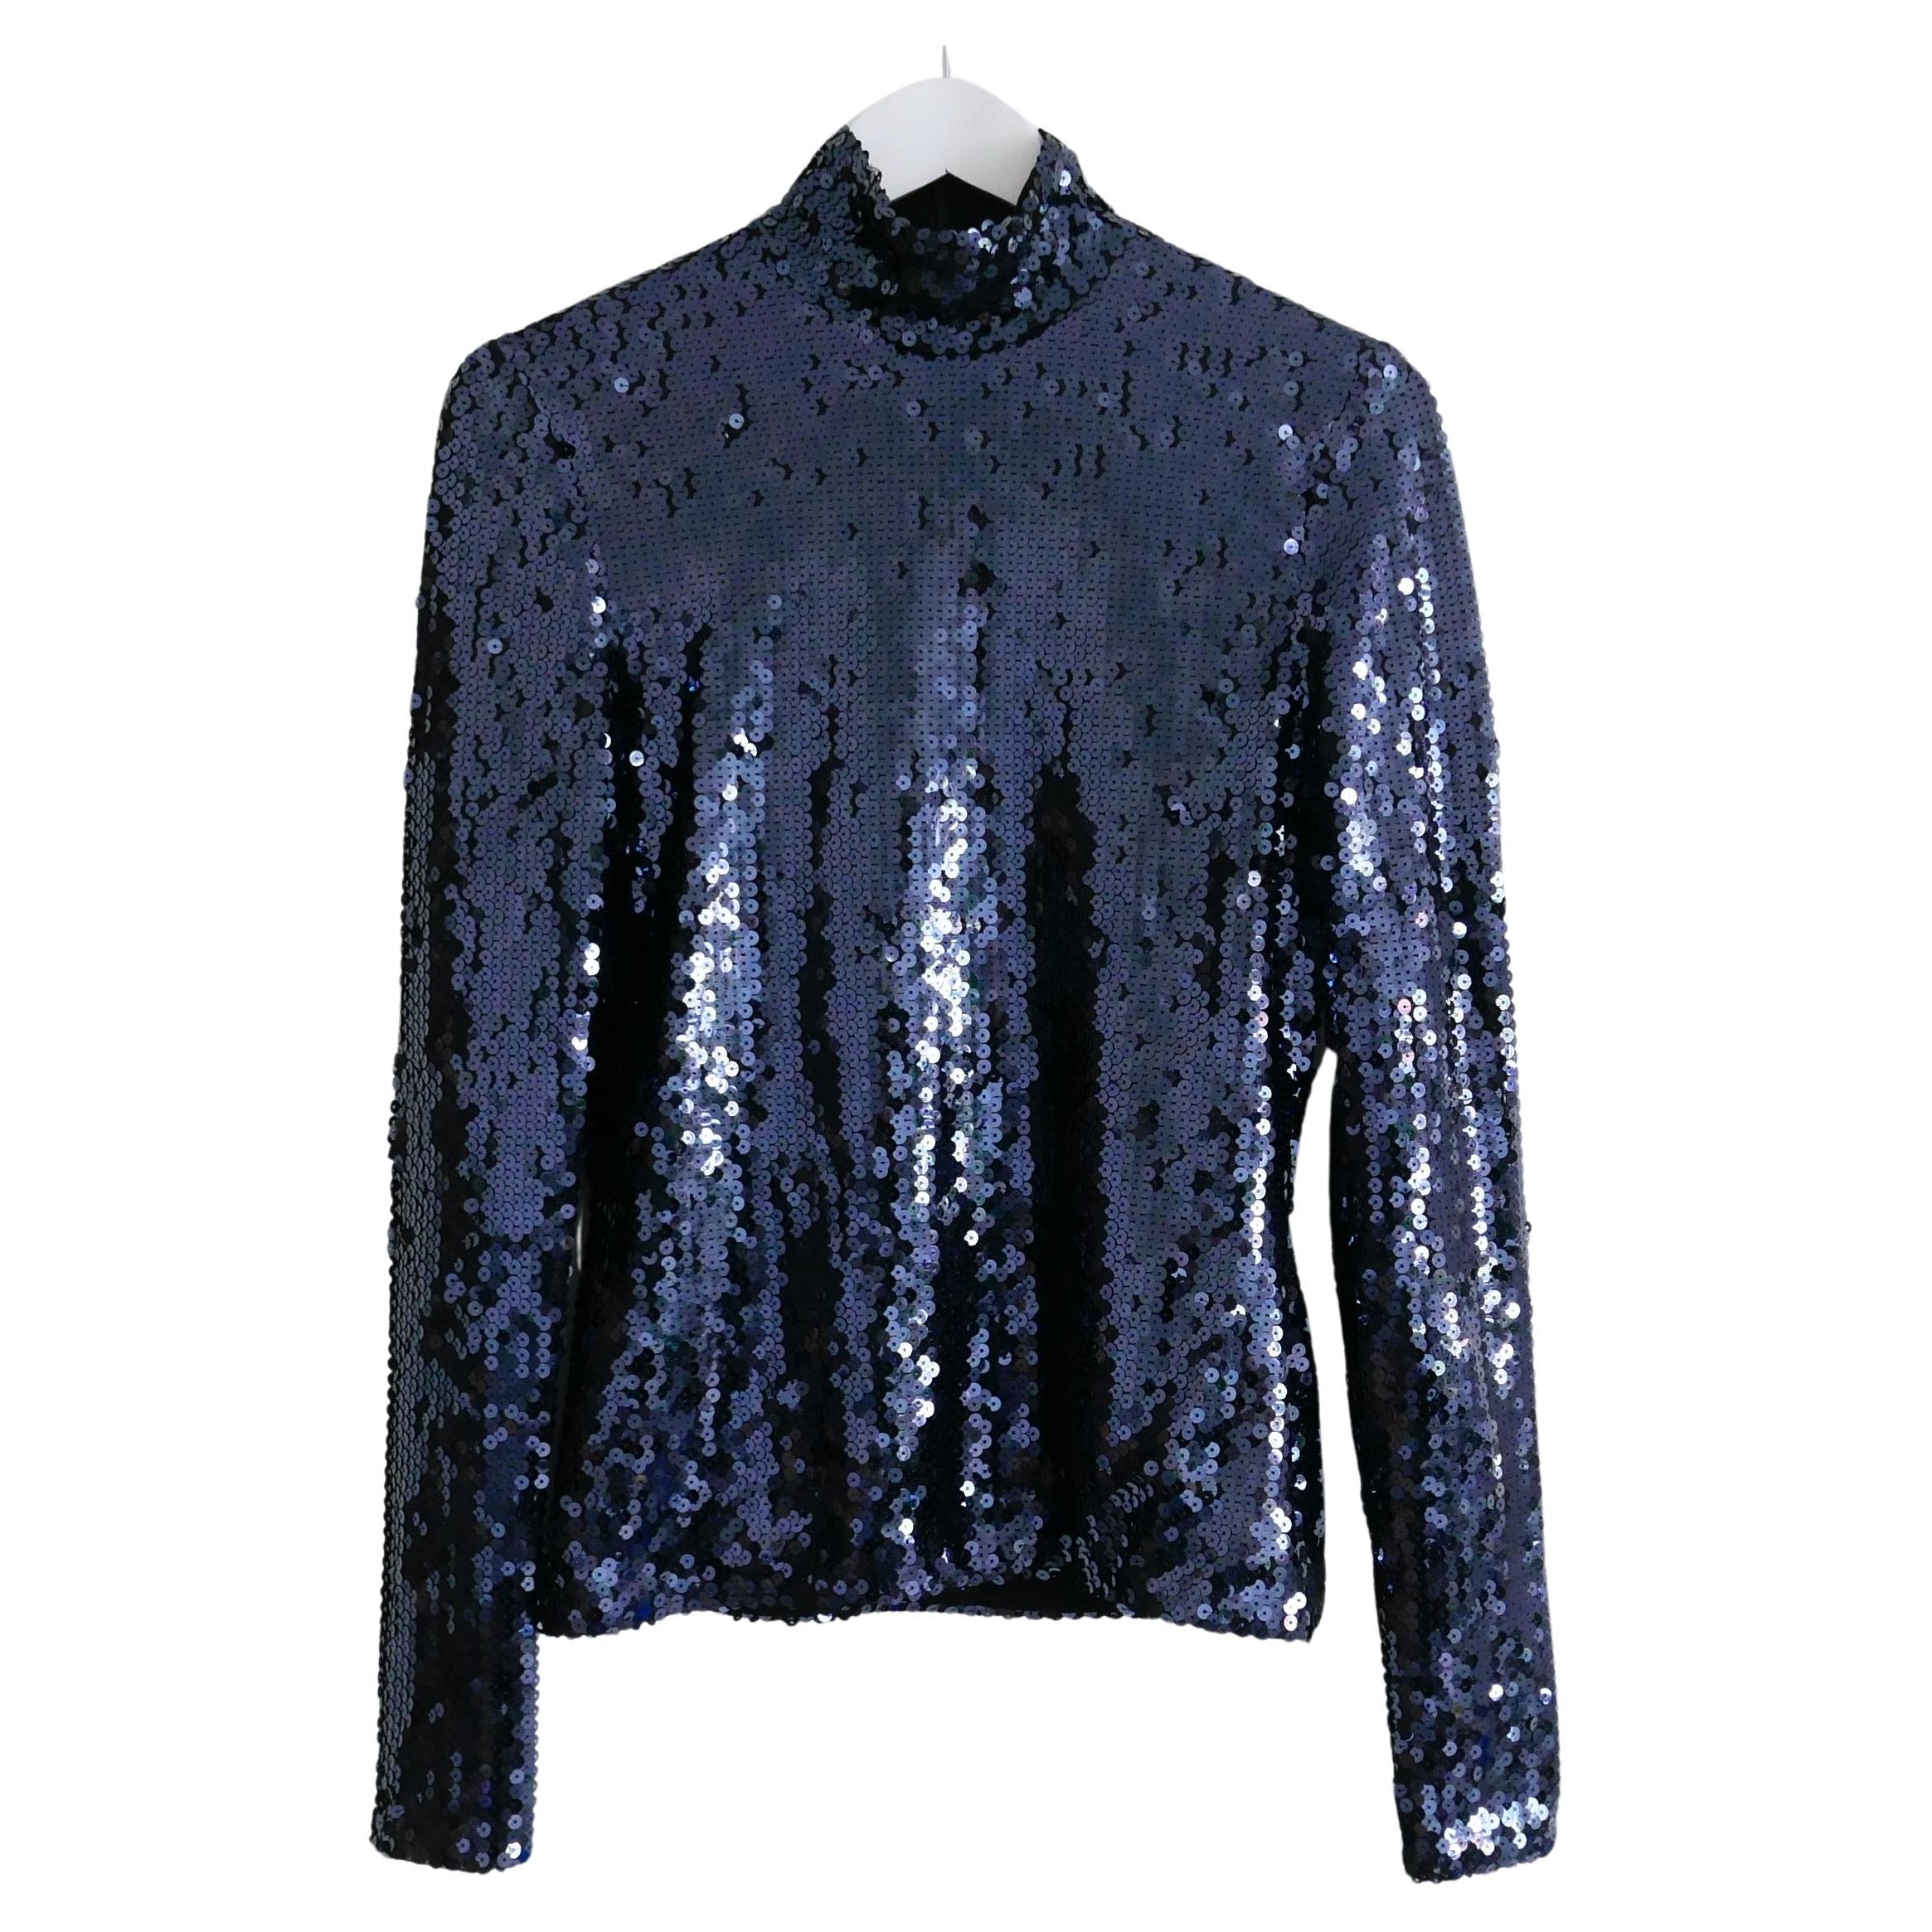 Dior x Raf Simons Pre-Fall 2015 Sequin High Neck Top For Sale